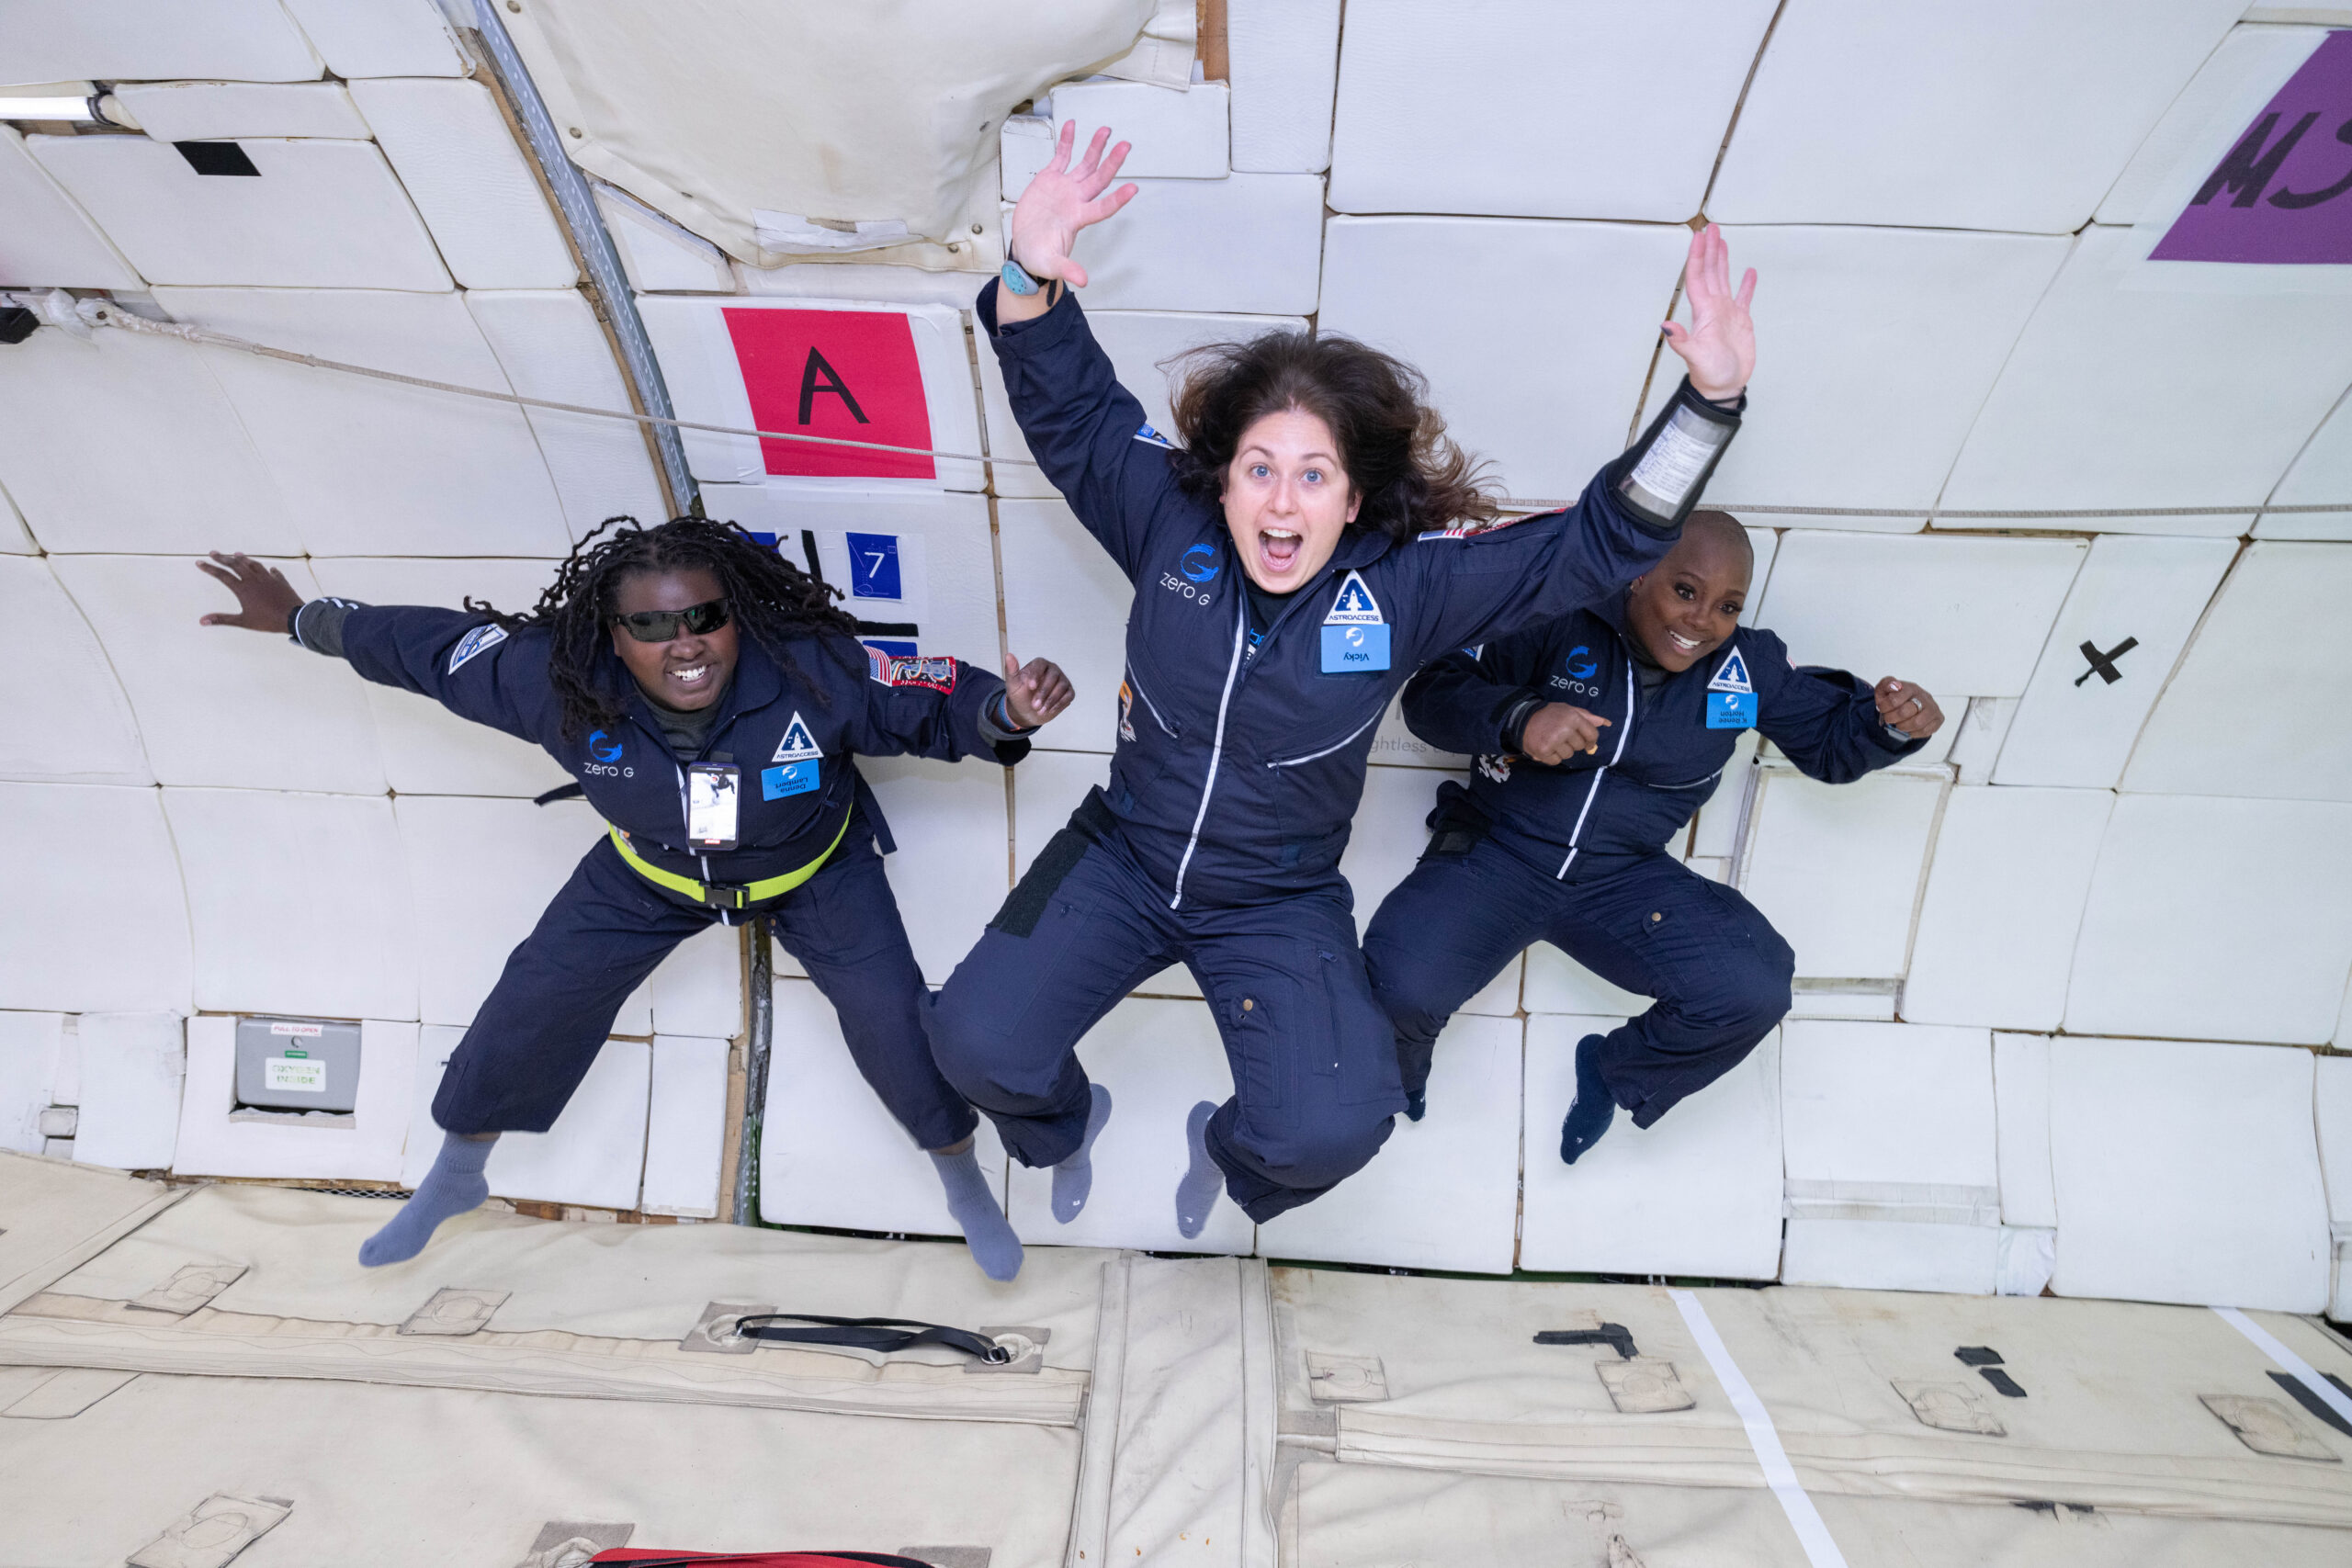 Featured image for “AstroAccess announces Ambassadors and flight crew for Next Weightless Flight”